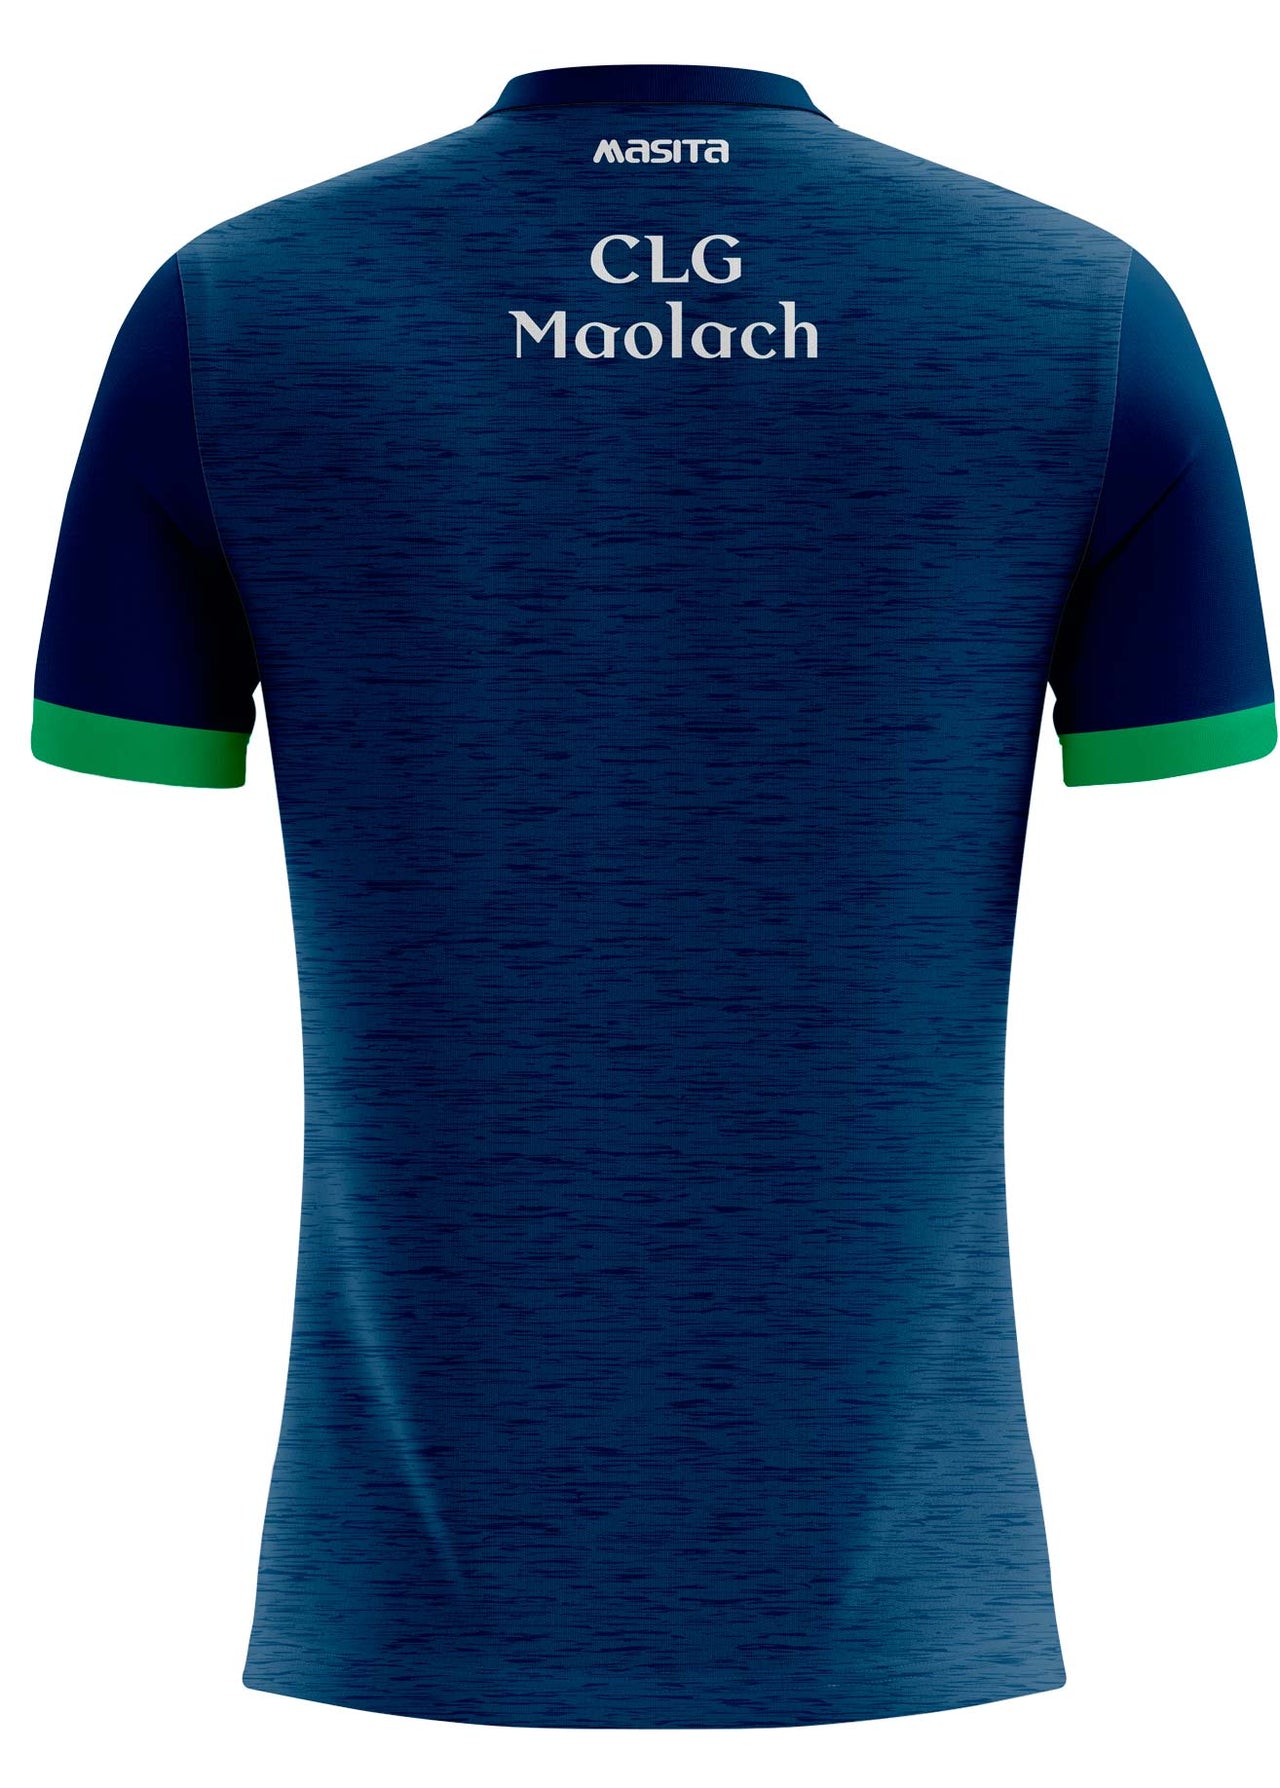 Moylagh CLG Training Jersey Player Fit Adult